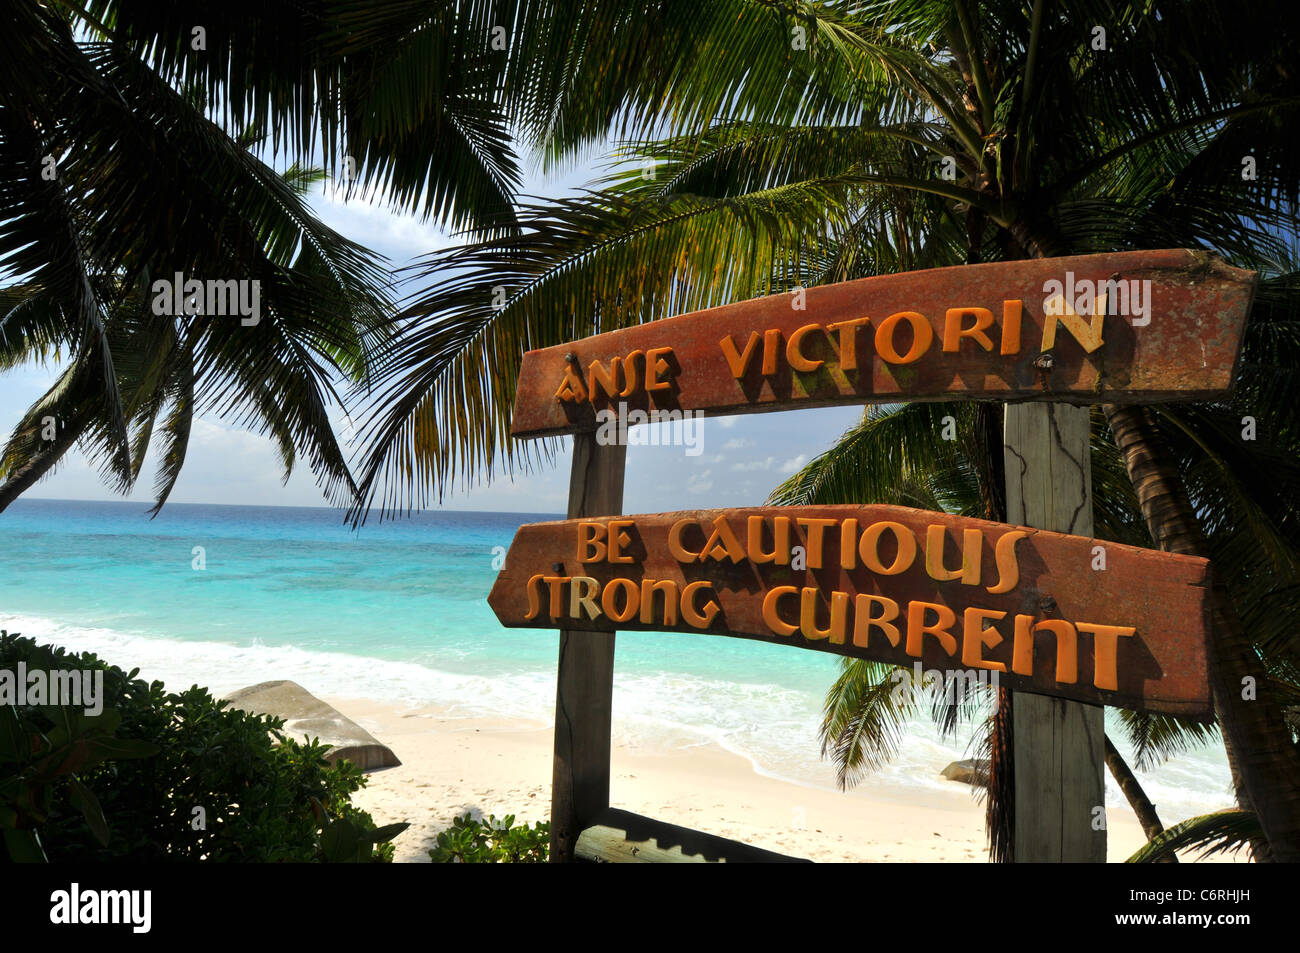 Anse Victorin, listed as one of the best beaches in the world, Fregate Island Private, a holiday resort island, The Seychelles. Stock Photo